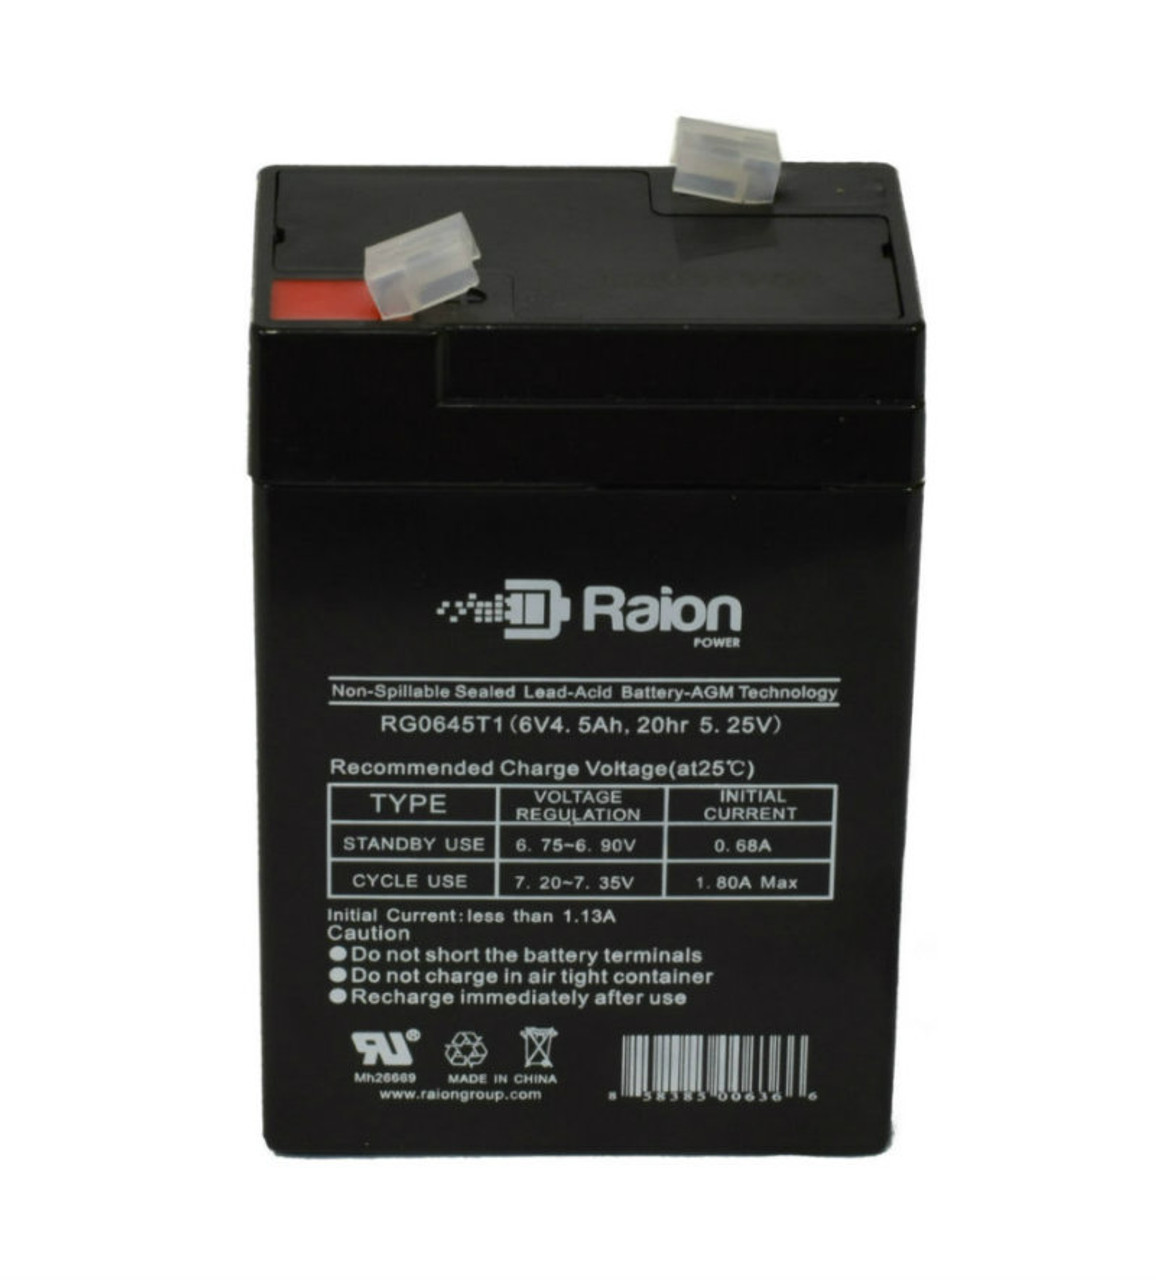 Raion Power RG0645T1 Replacement Battery Cartridge for Criticare Systems 504